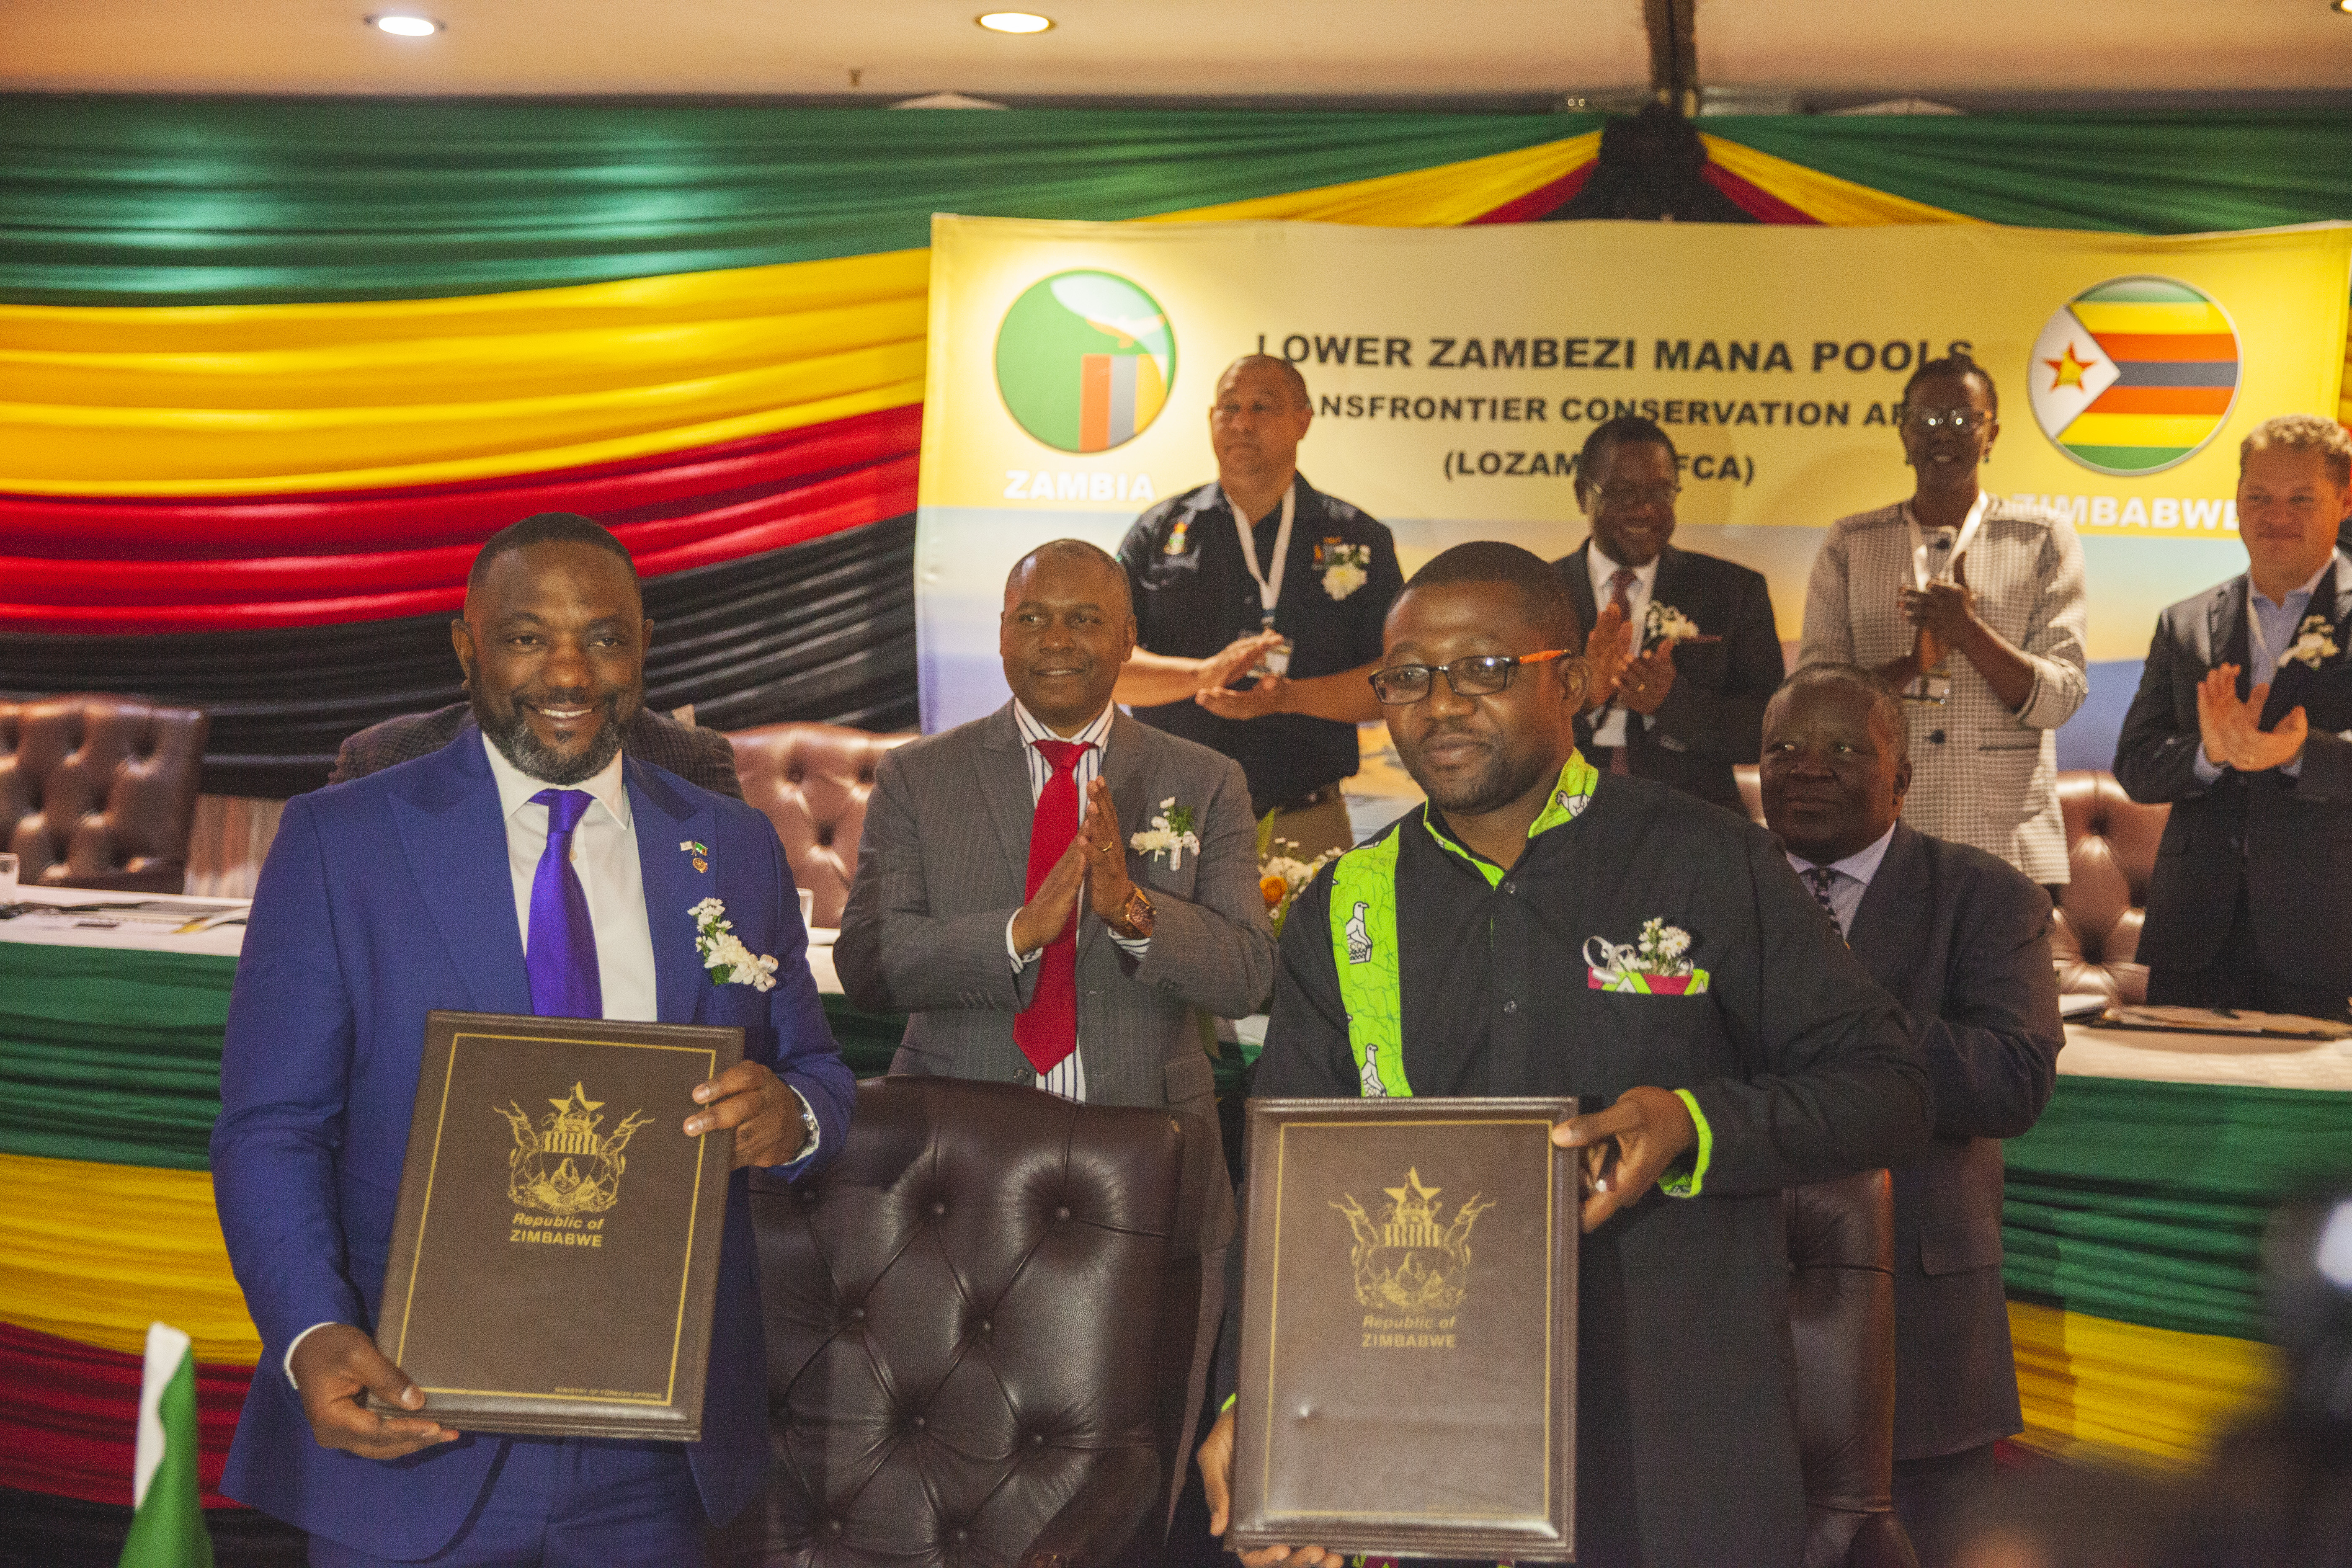 The MOU for LOZAMAP TFCA between Zambia and Zimbabwe is signed